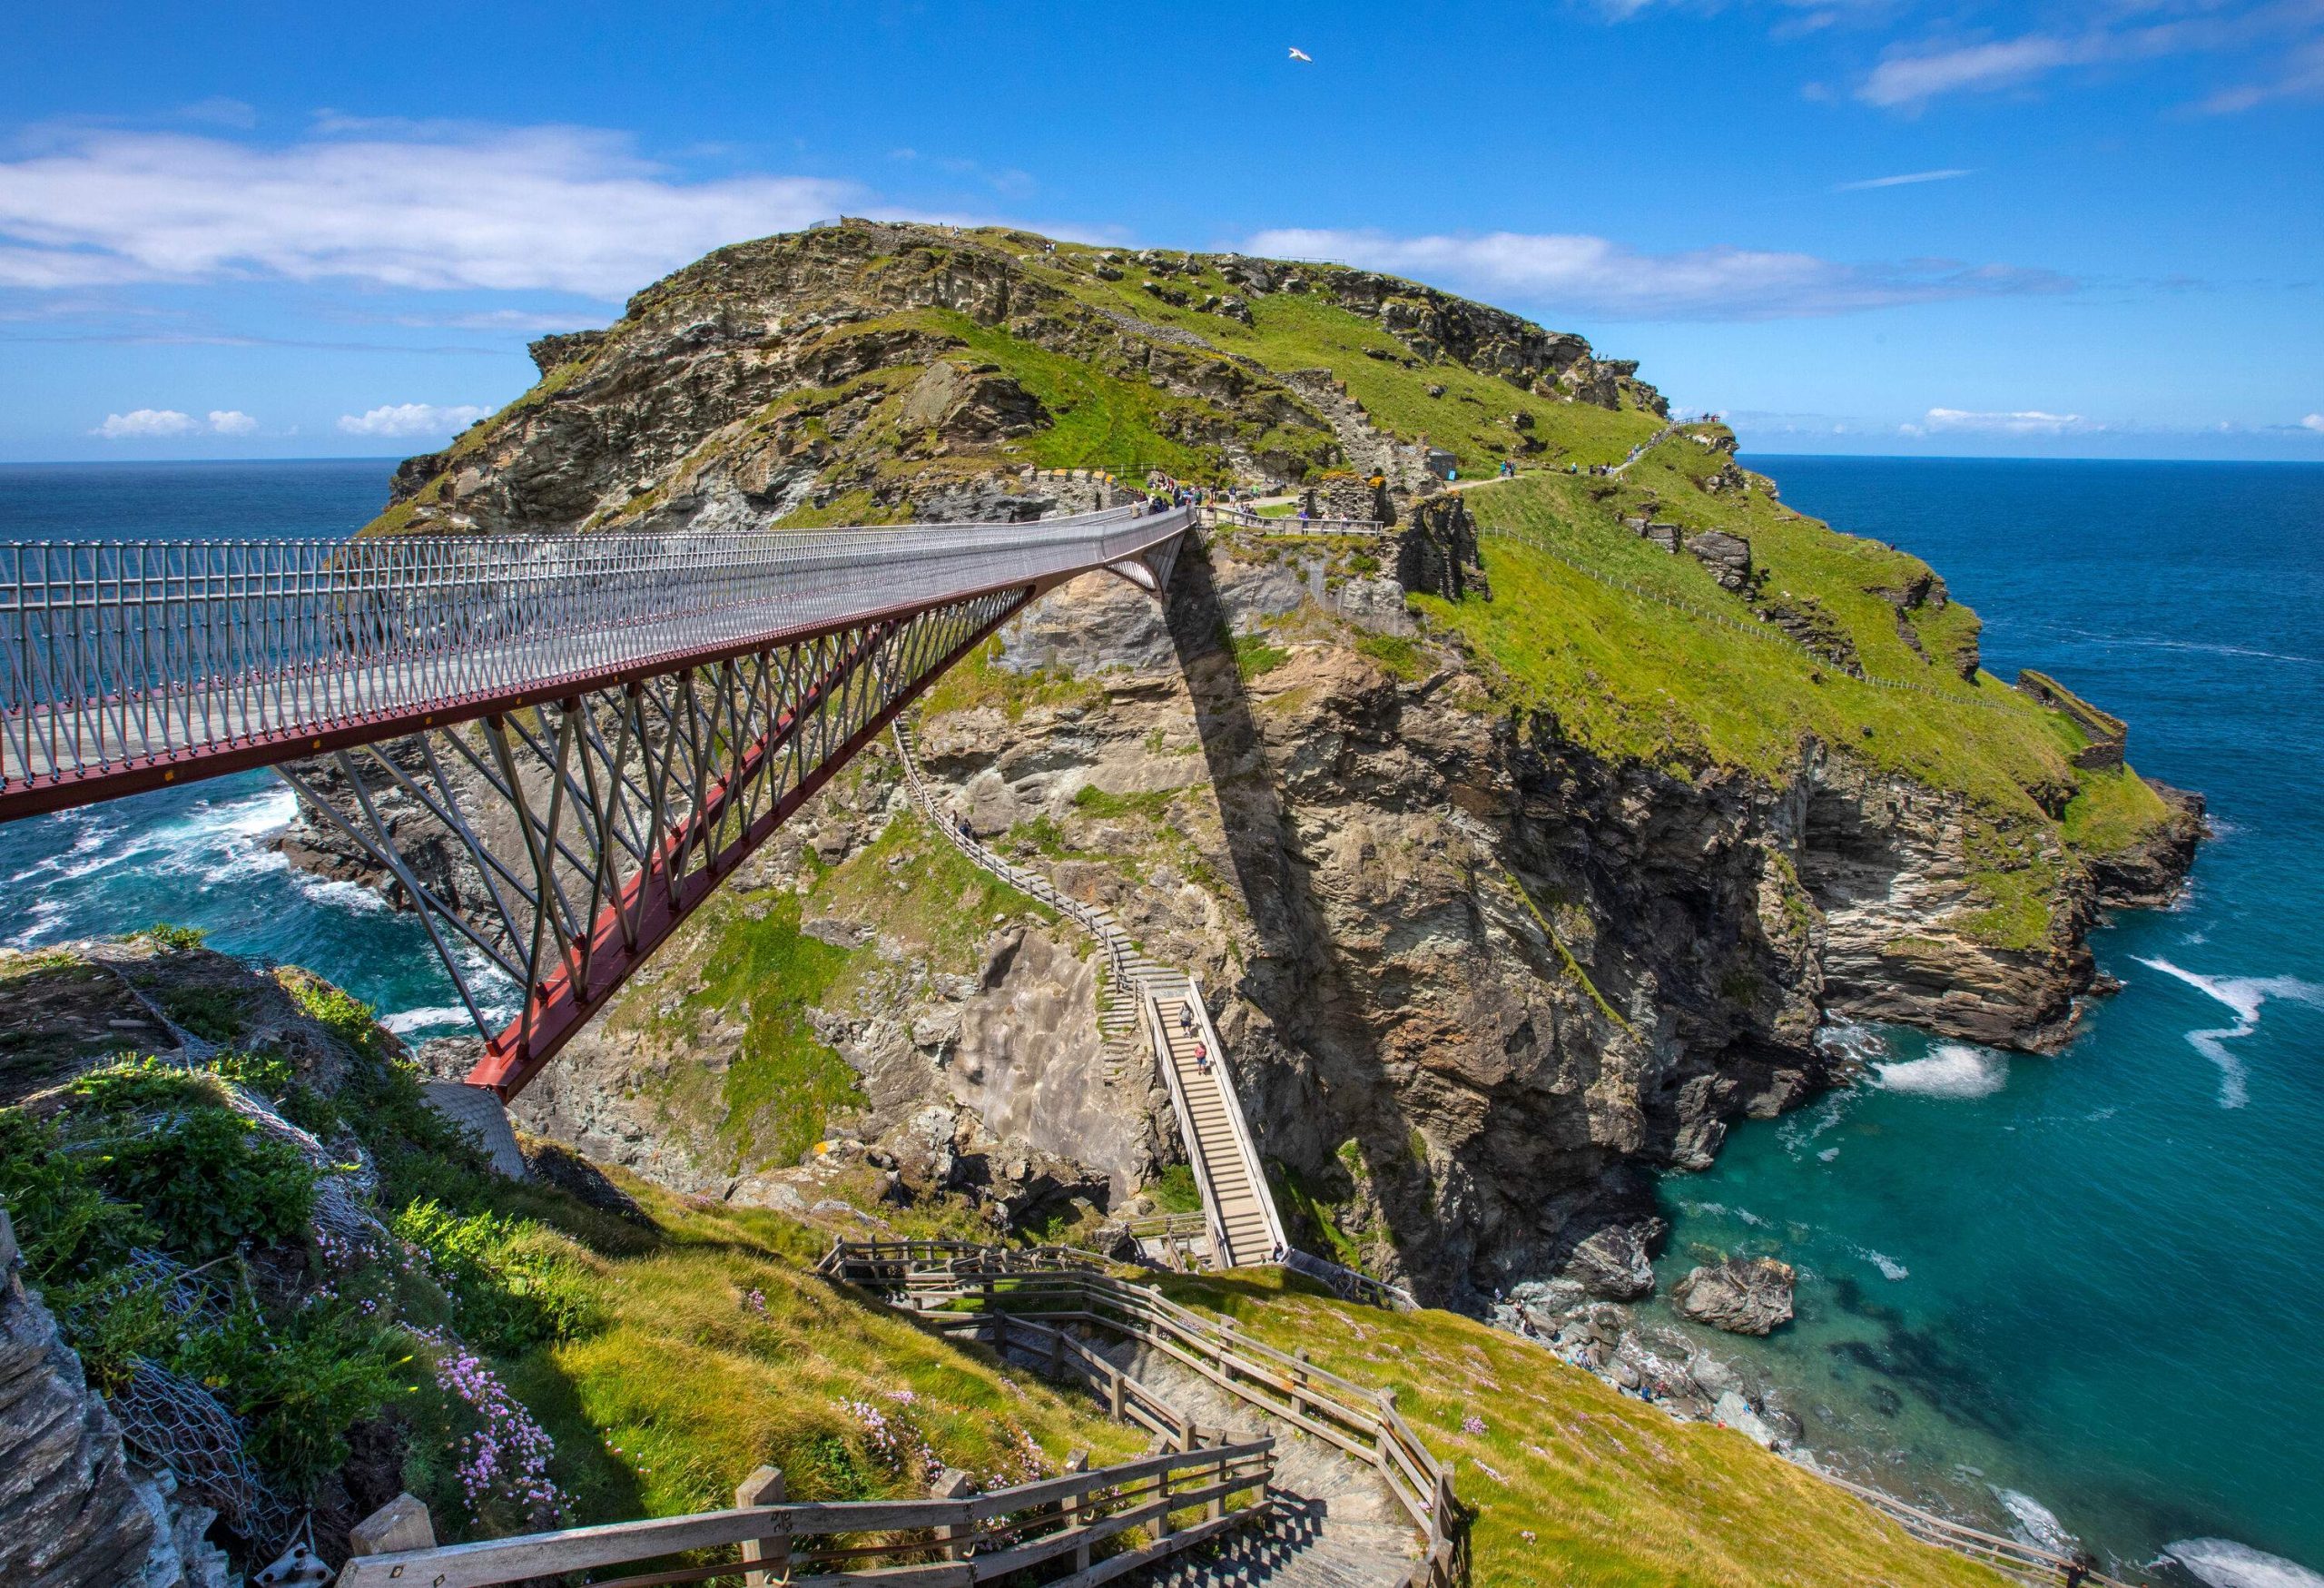 The Tintagel Castle Footbridge elegantly stretches across the rugged cliffs, suspended above the sparkling waters below.